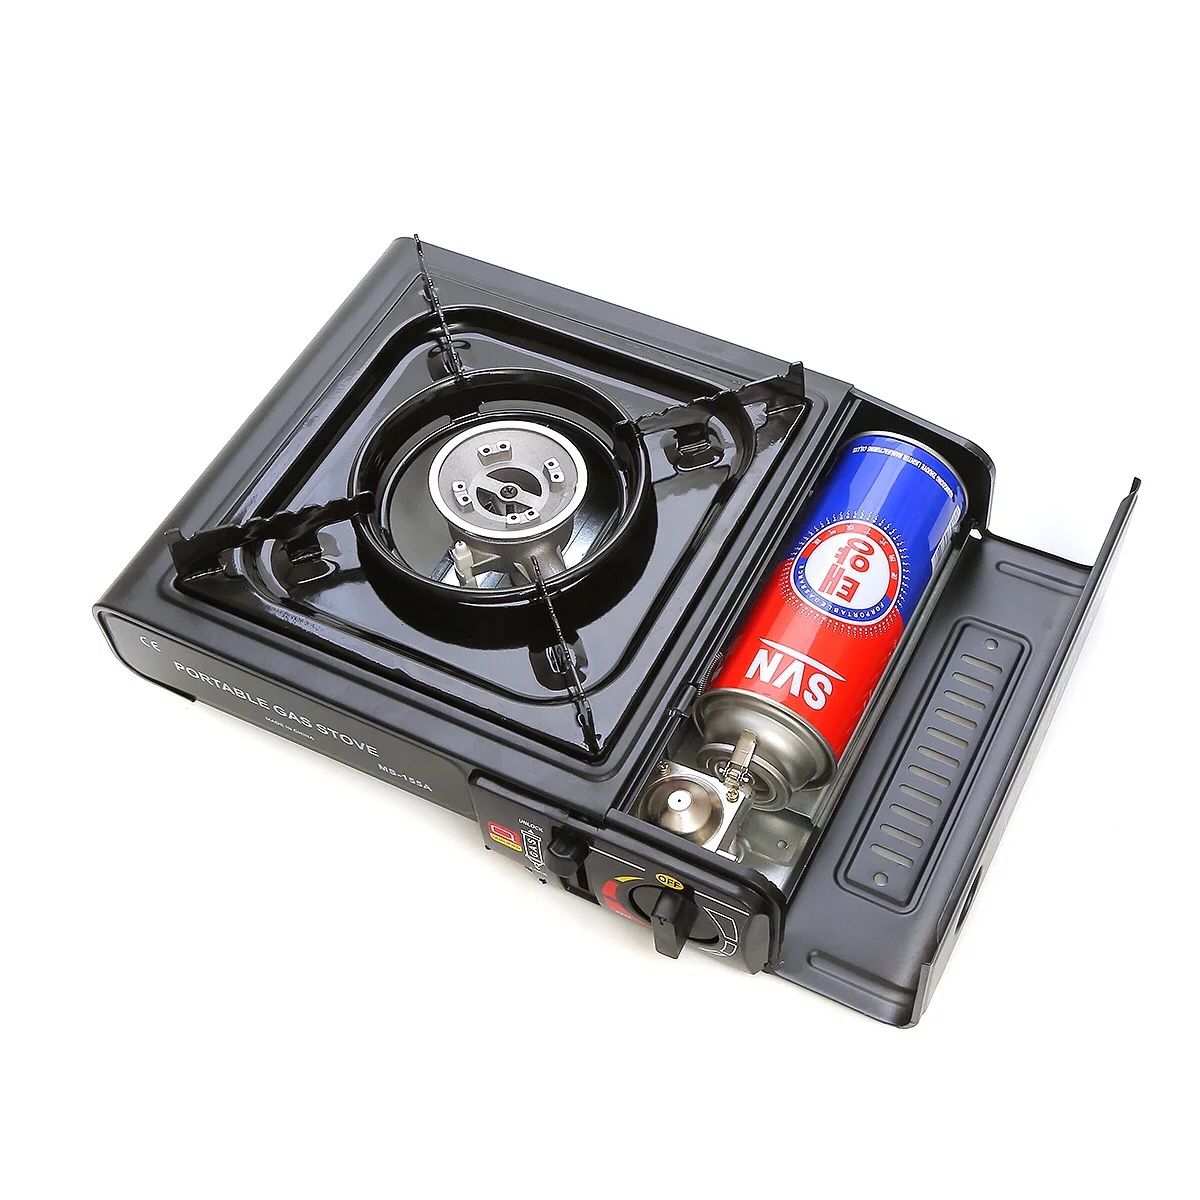 Portable Gas Outdoor Camping Stove Light weight Stove | XXKISYGSBK